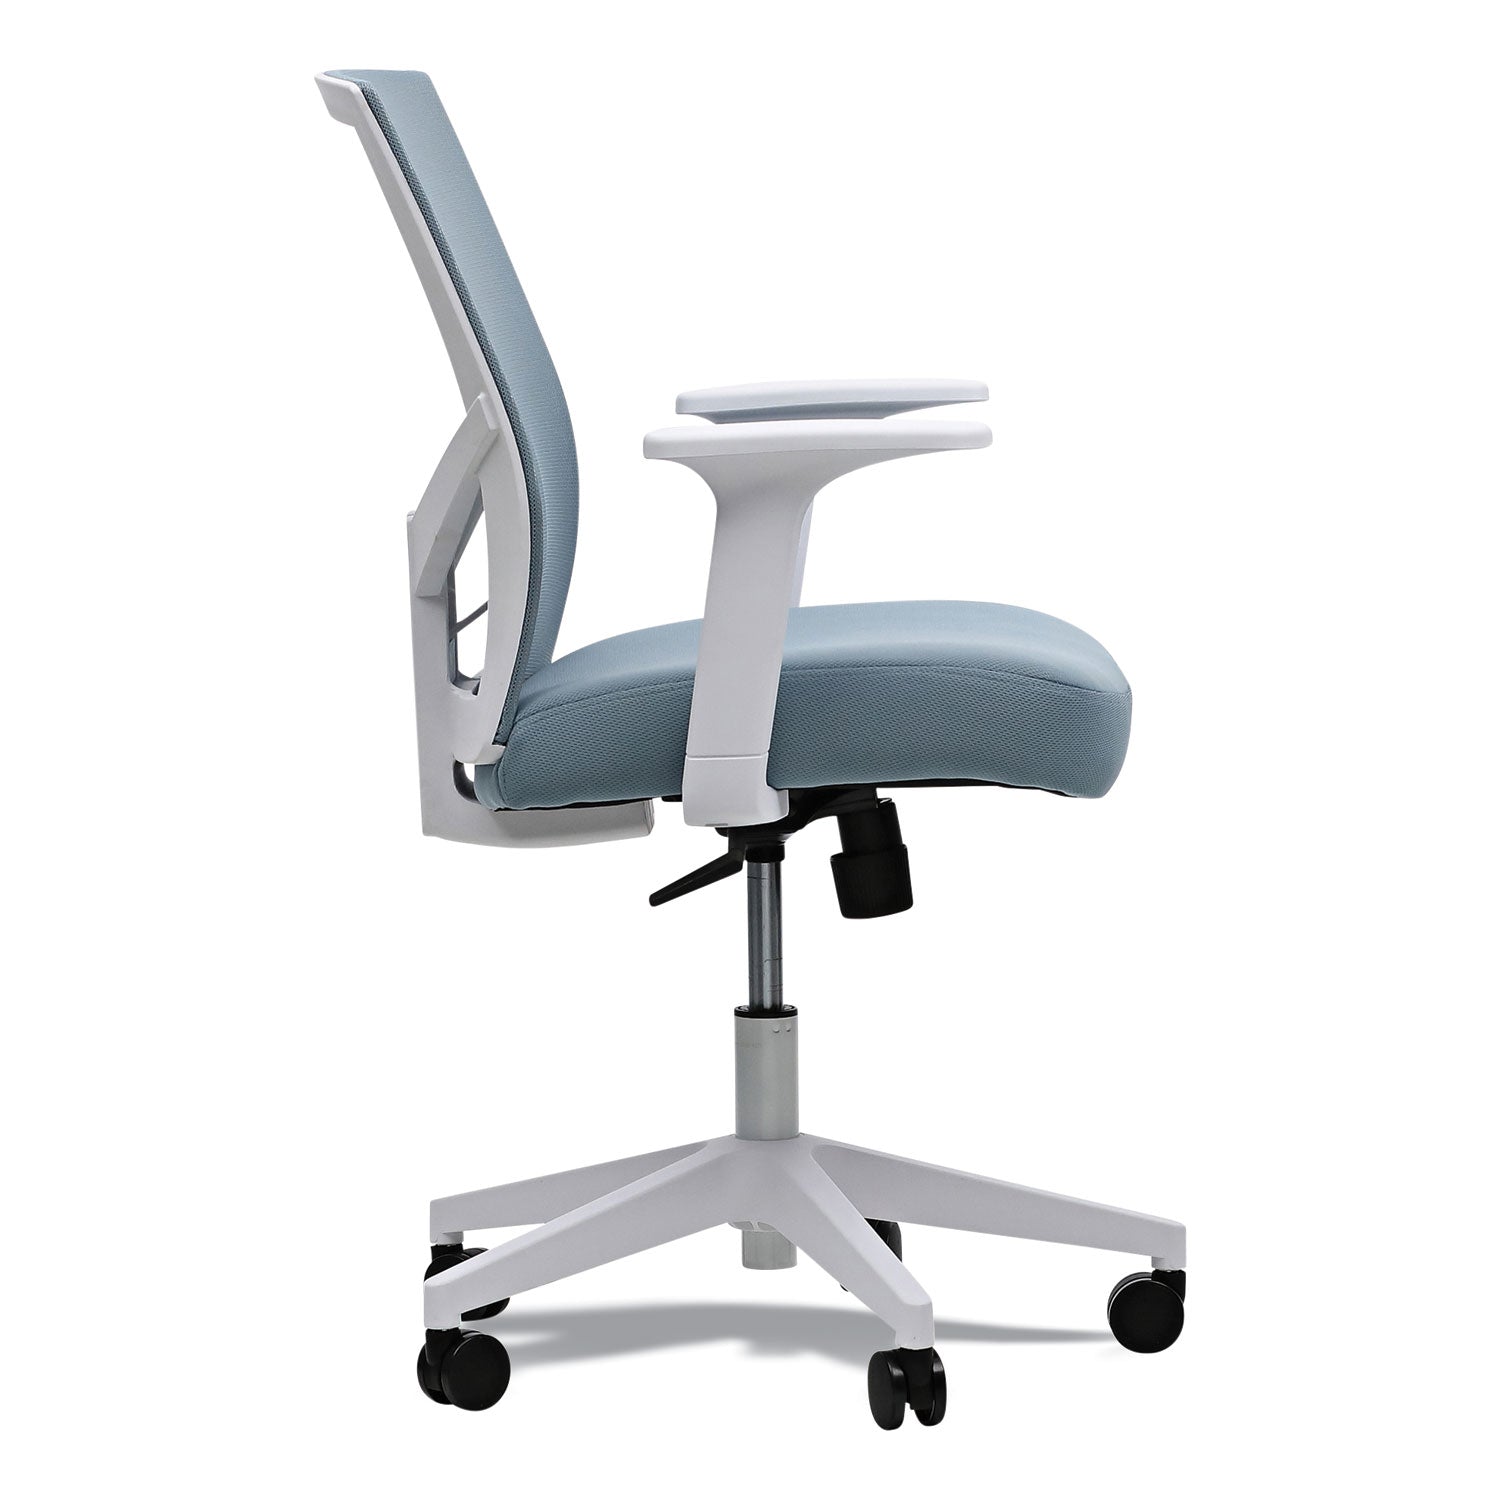 mesh-back-fabric-task-chair-supports-up-to-275-lb-1732-to-211-seat-height-seafoam-blue-seat-back_alews42b77 - 8